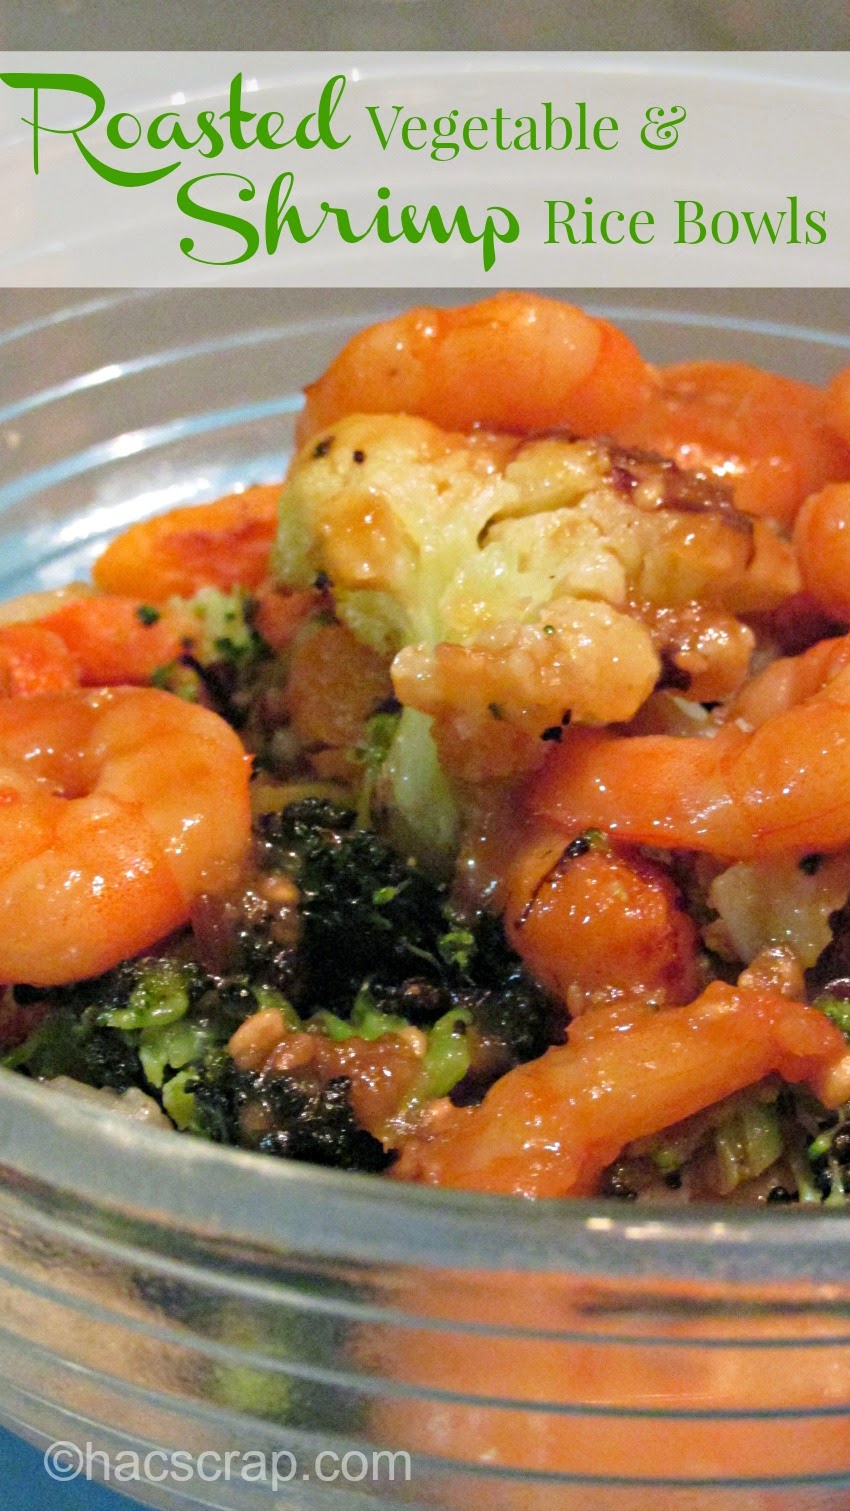 Quick and Easy Dinner Idea: Roasted Vegetable and Shrimp Rice Bowls